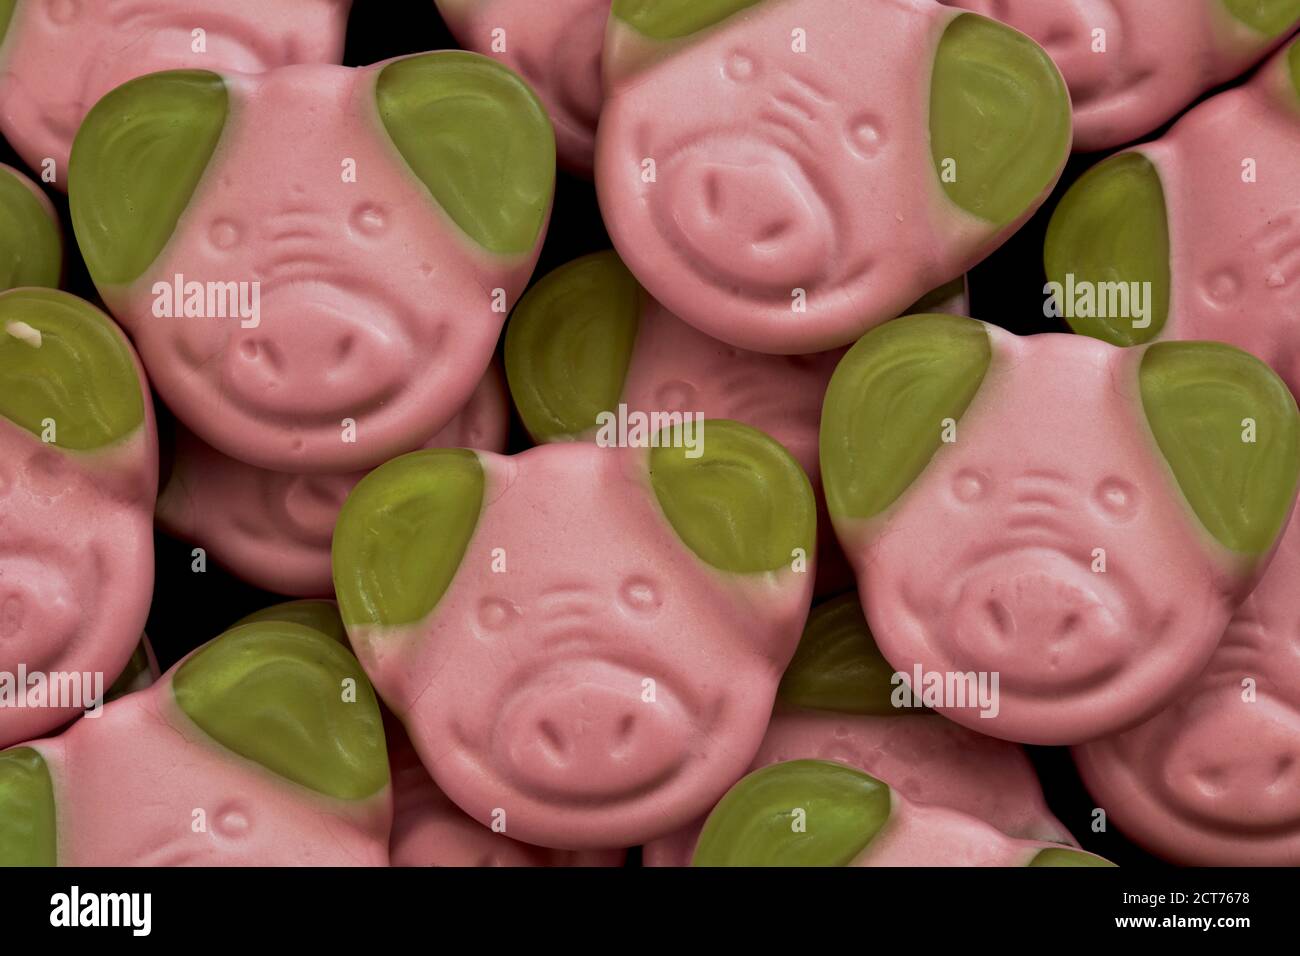 Percy Pig sweets Stock Photo